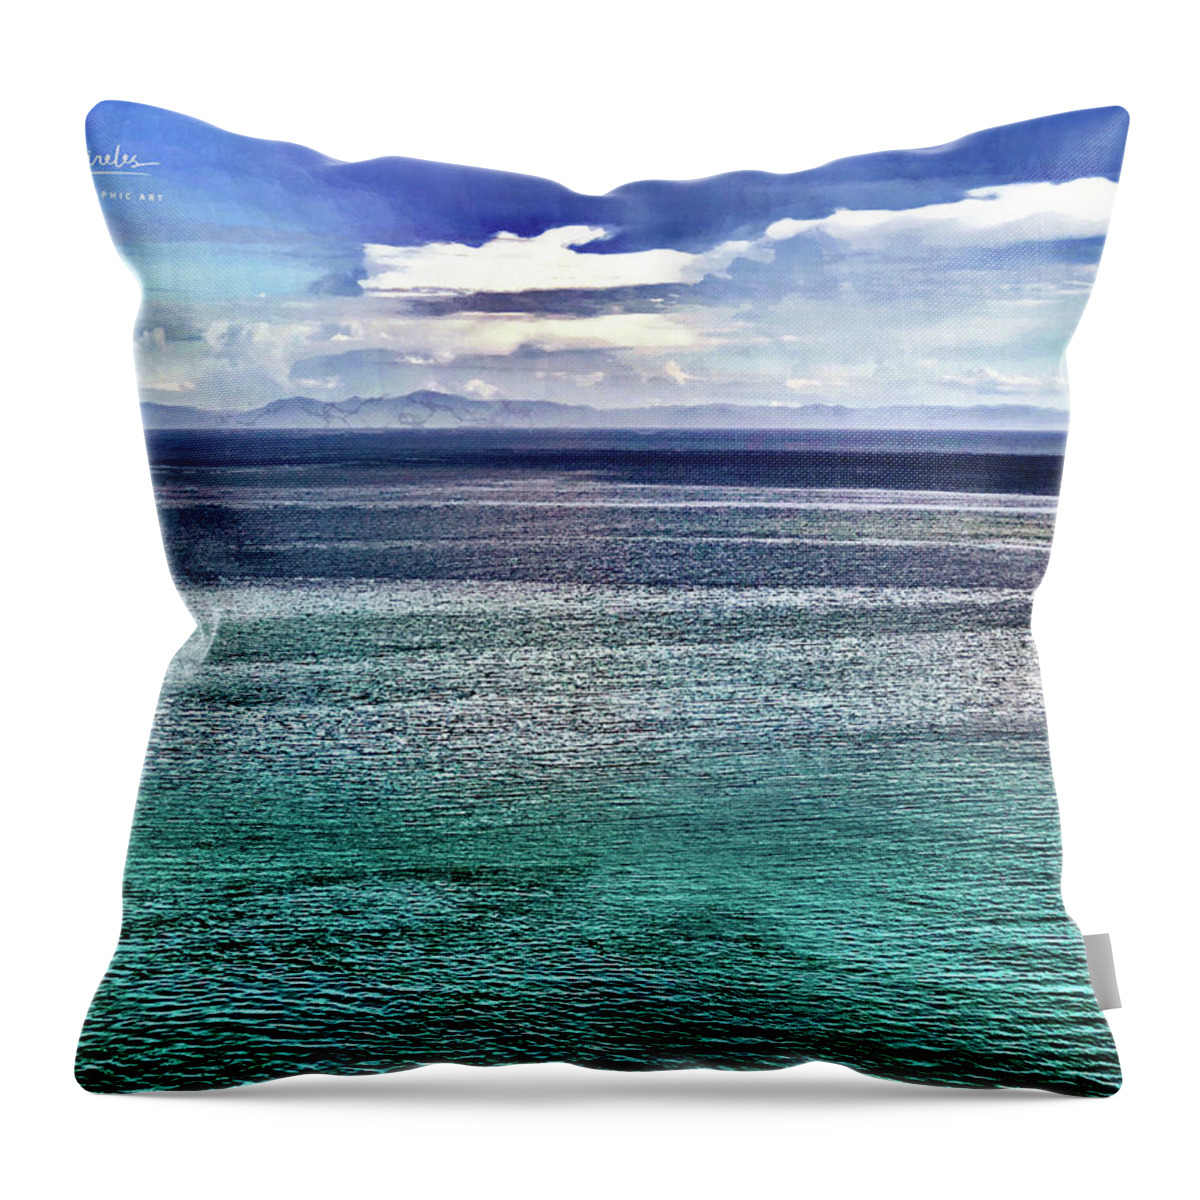 Seascape Throw Pillow featuring the photograph Land Ho by GW Mireles